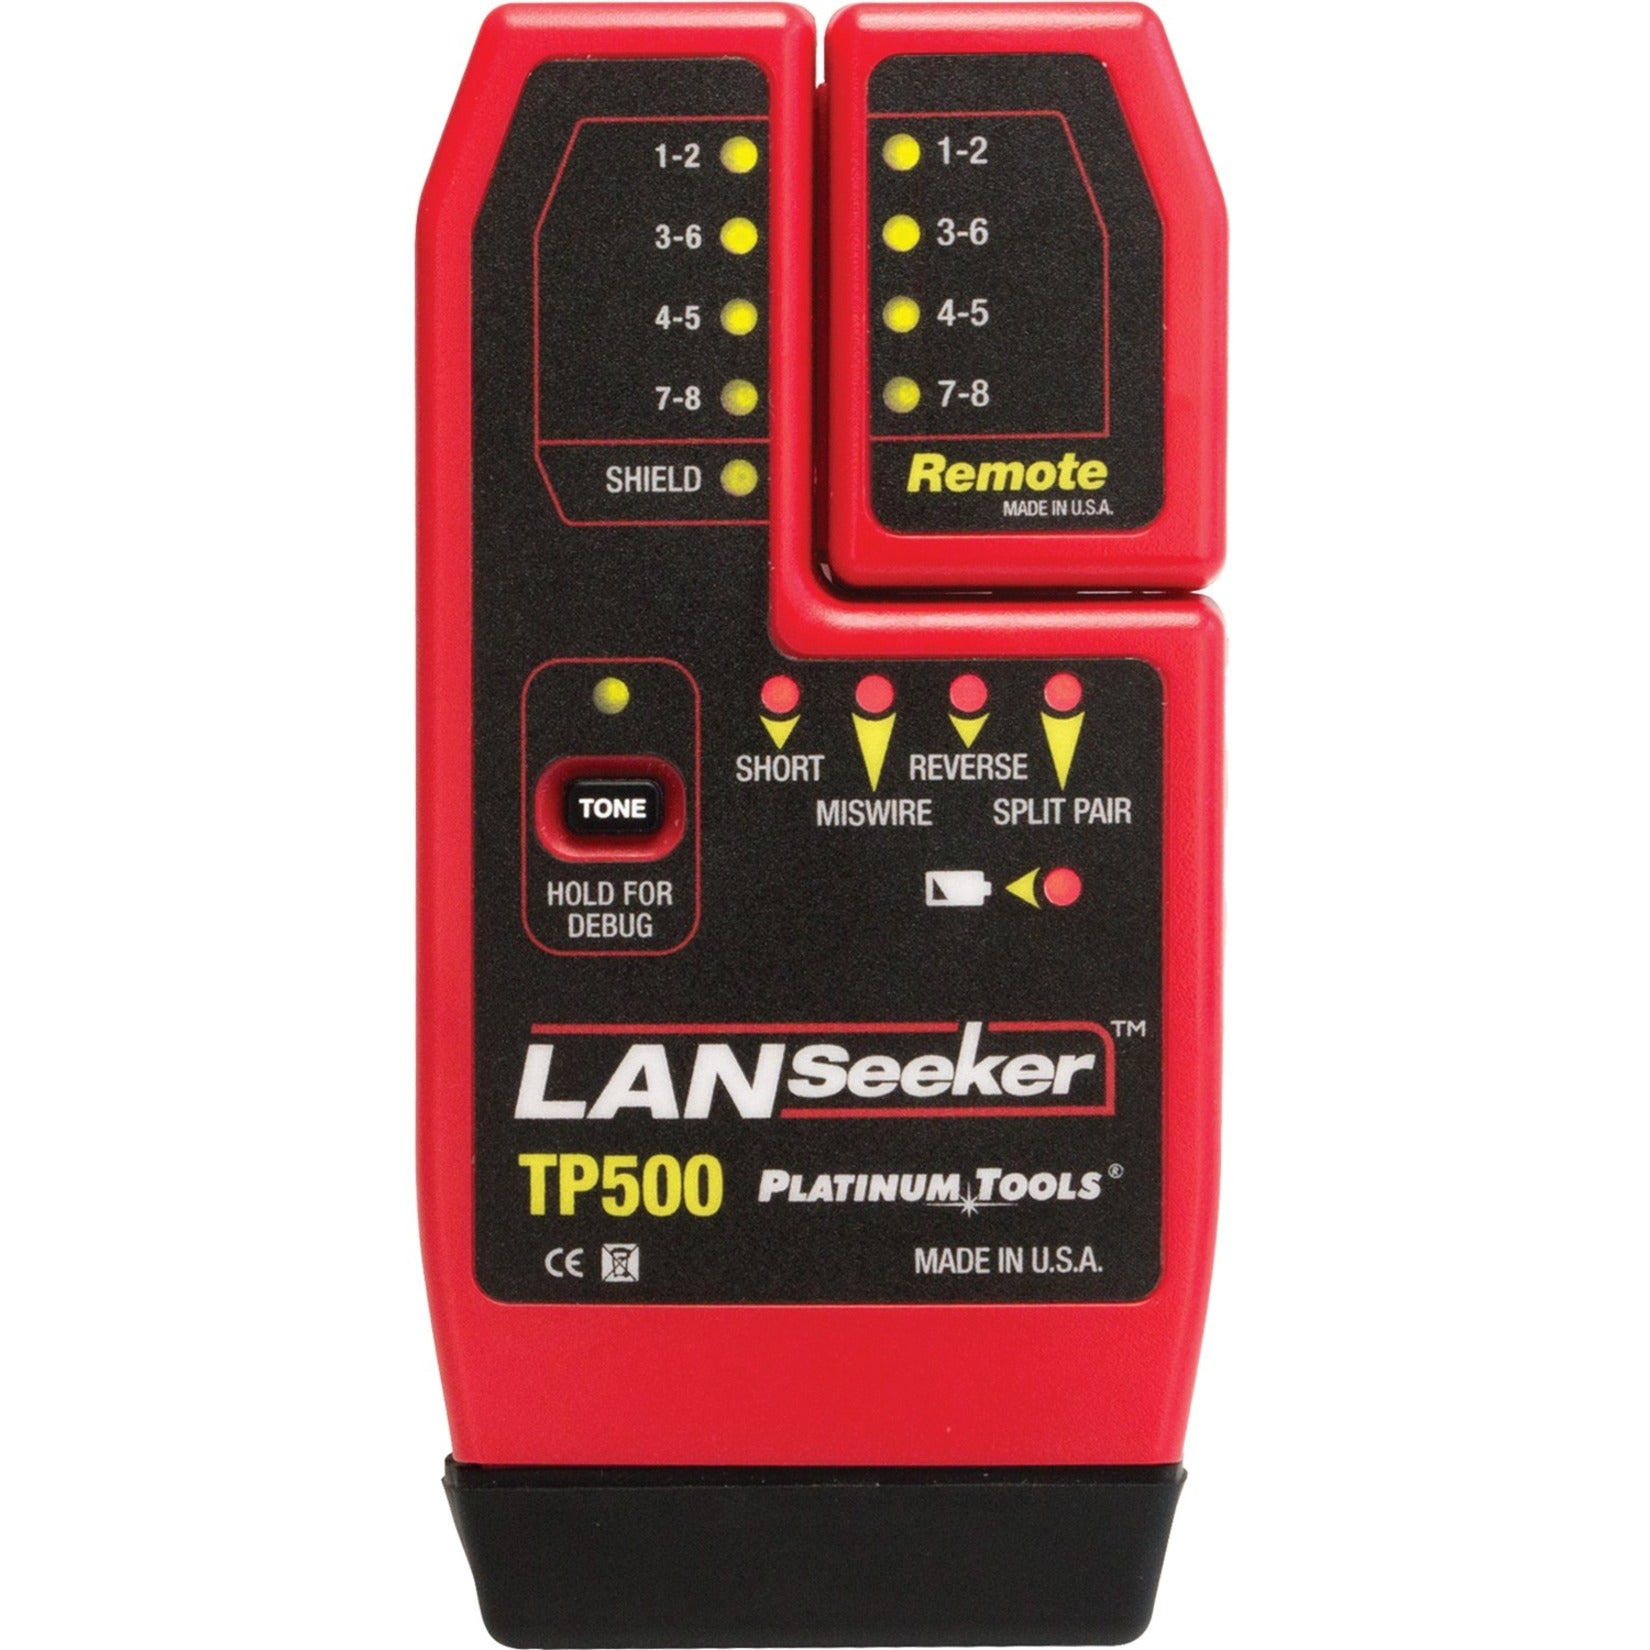 Platinum Tools TP500C LANSeeker Cable Tester, Cable Analyzer for Network Testing